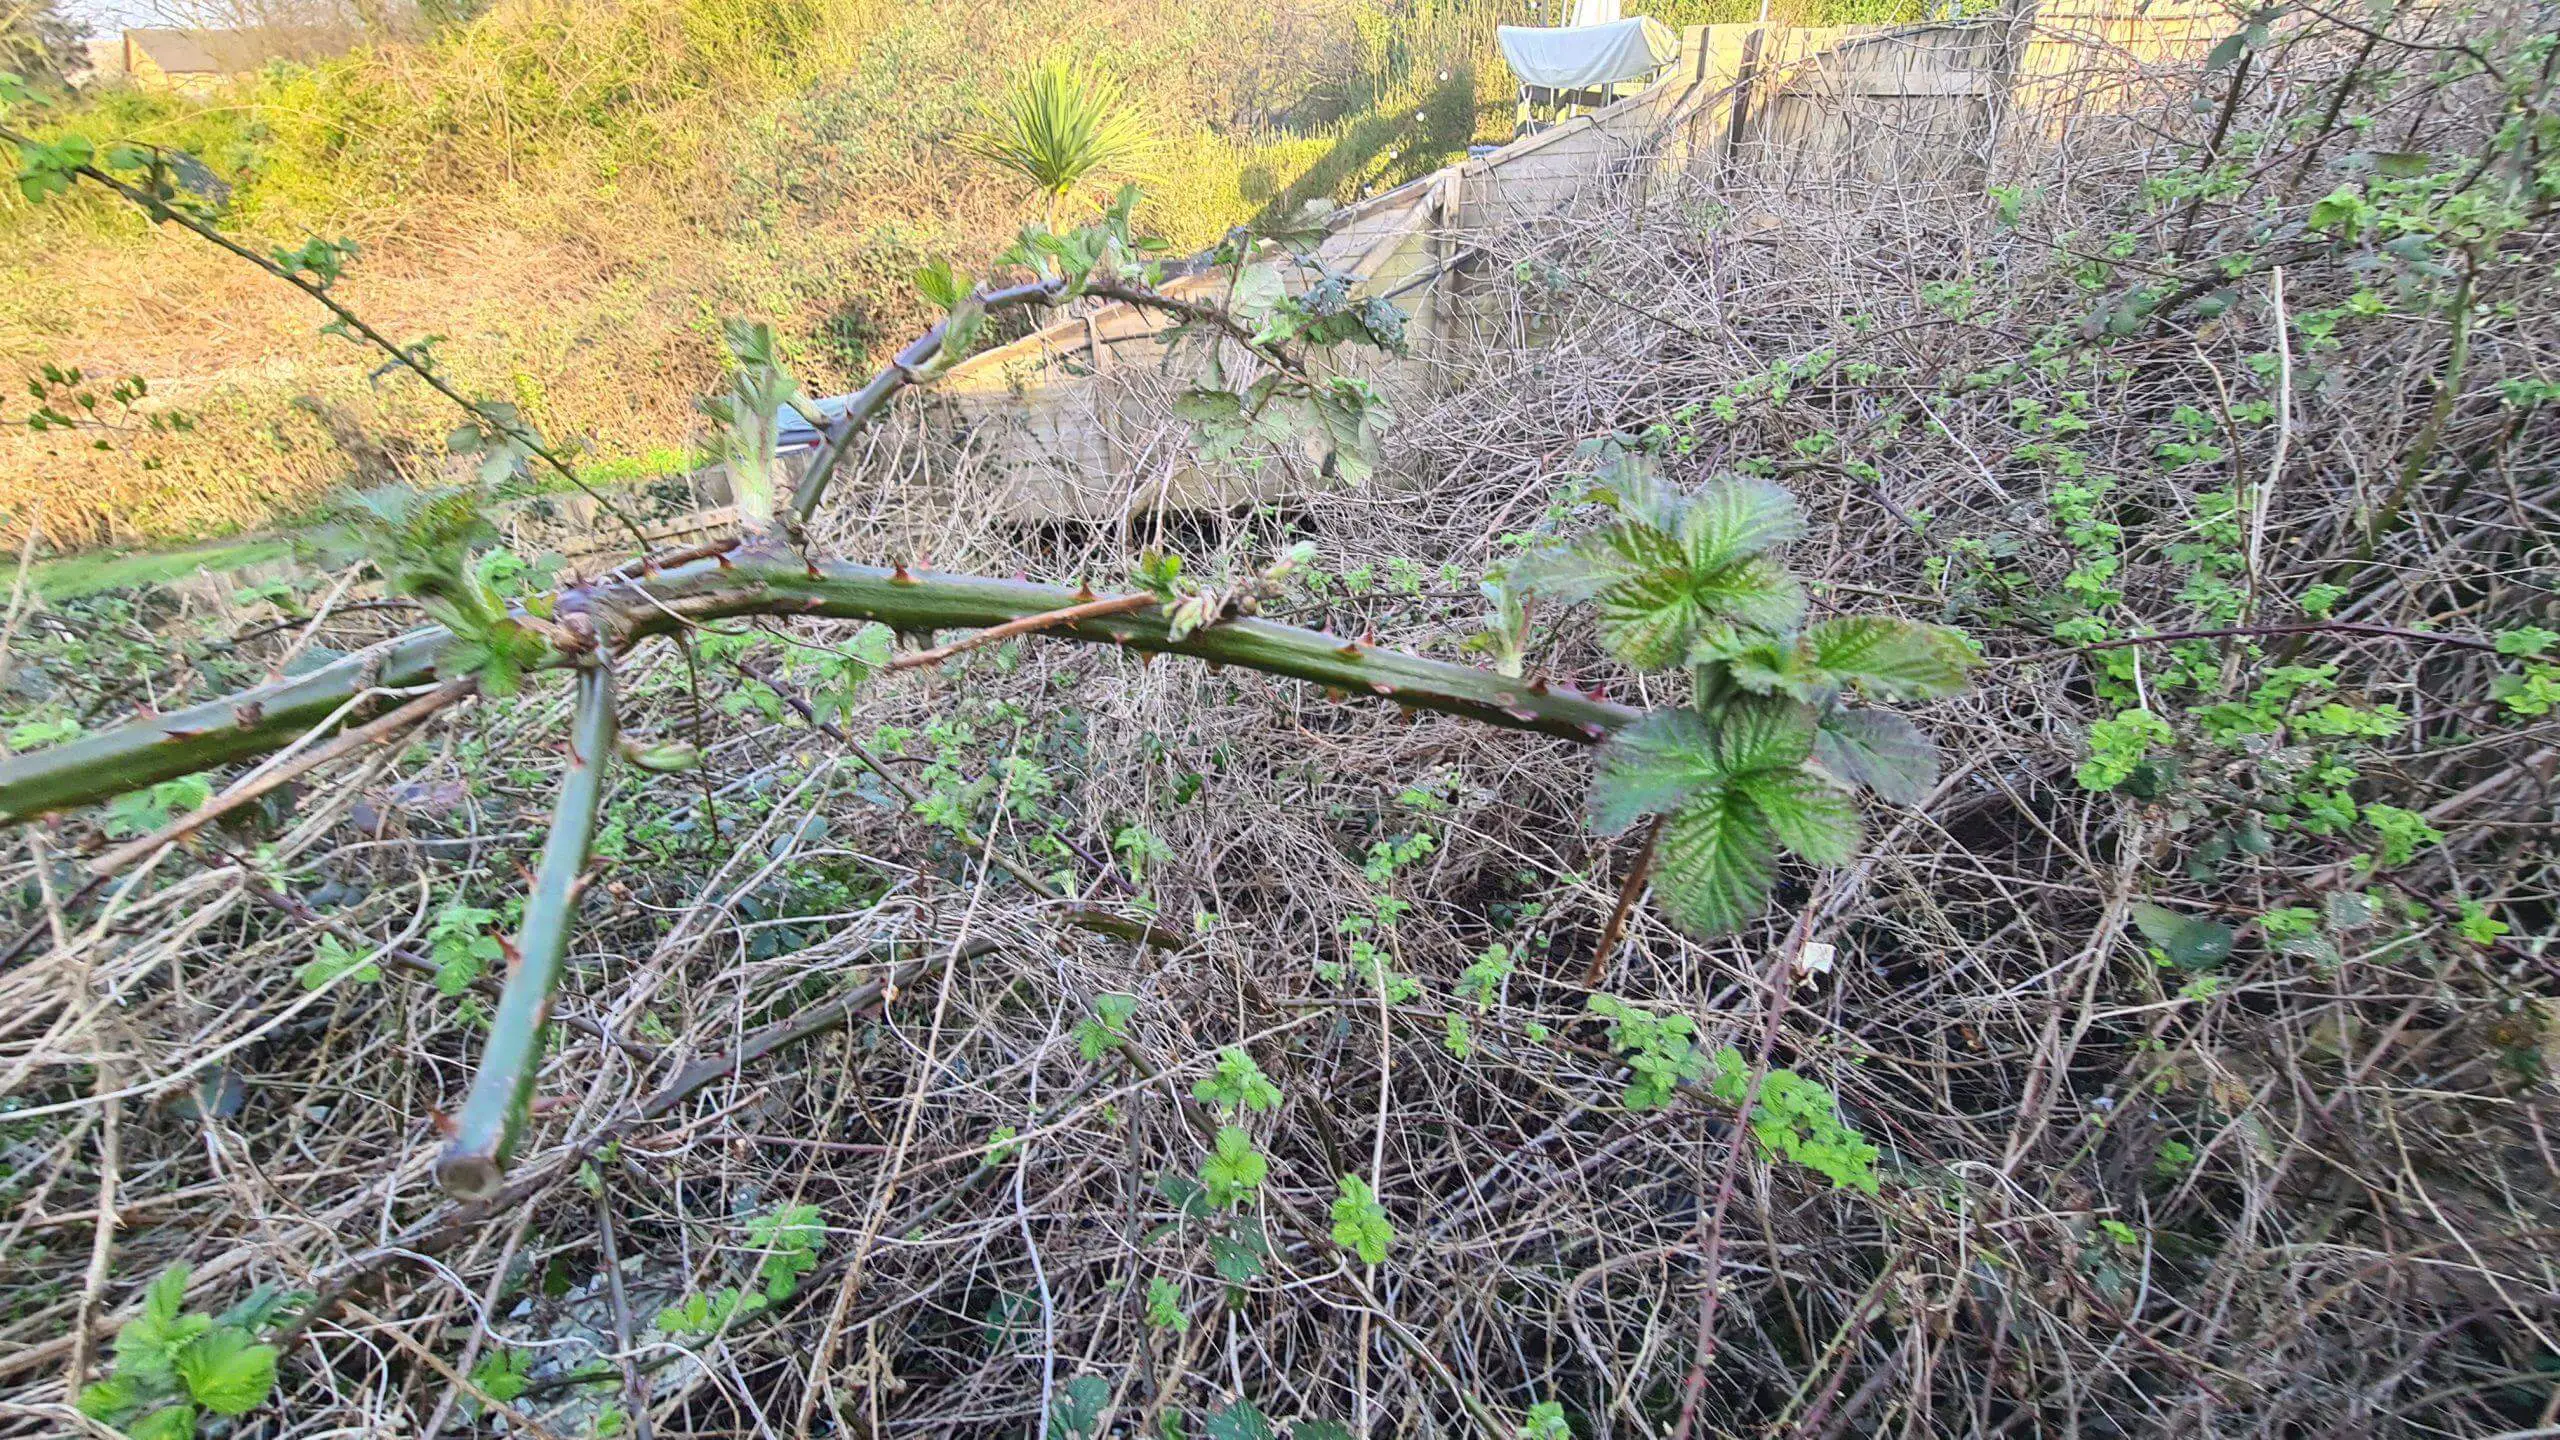 The twisting nature of brambles makes it difficult to remove without having to tackle a large area at anyone time